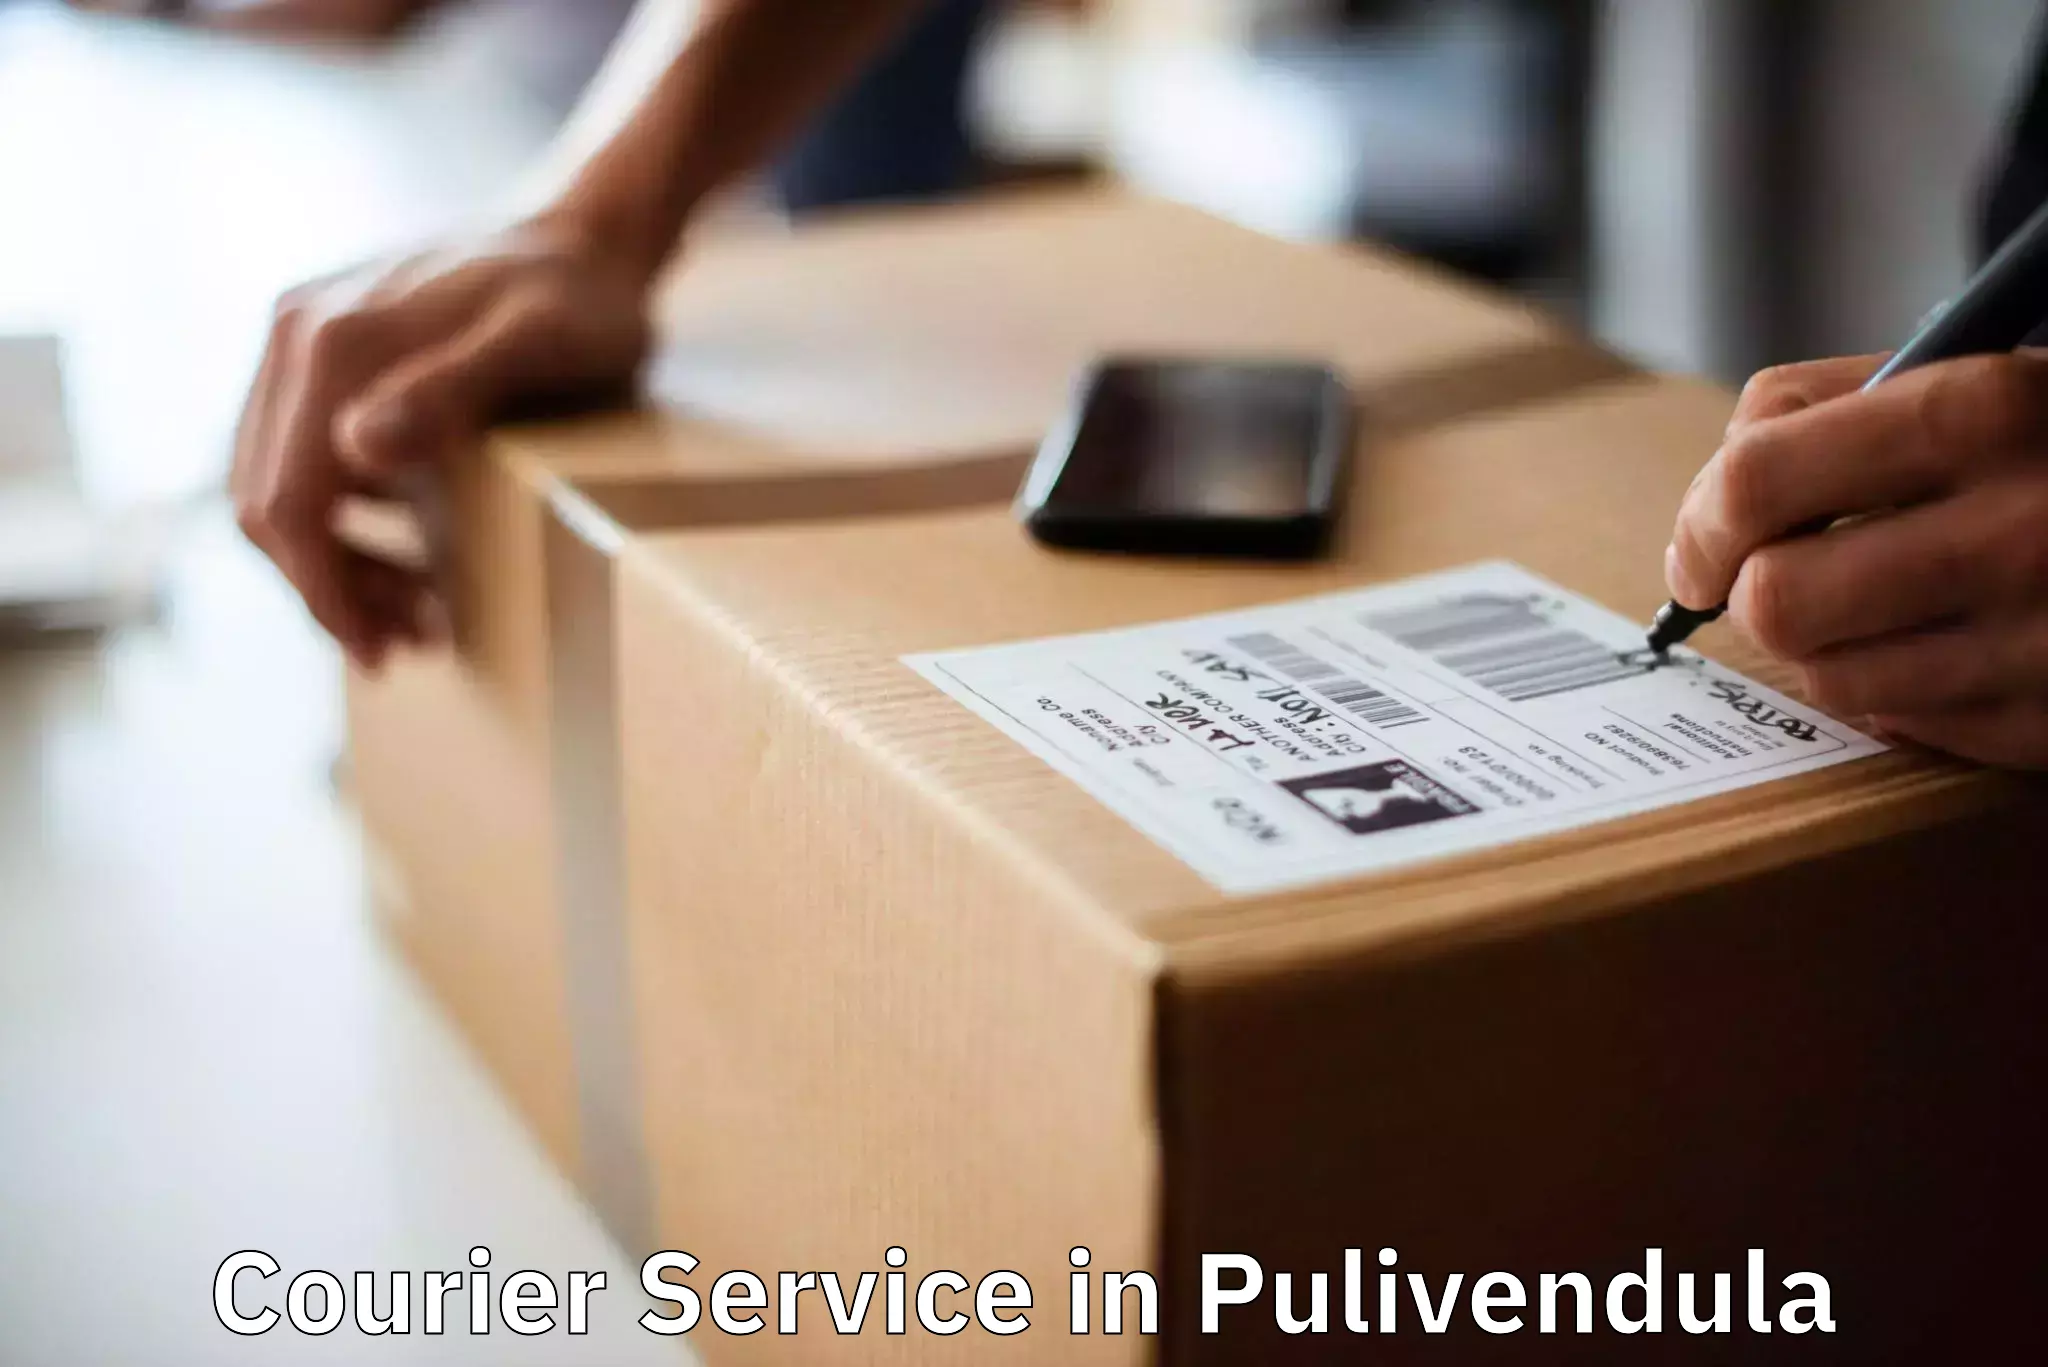 Overnight delivery in Pulivendula